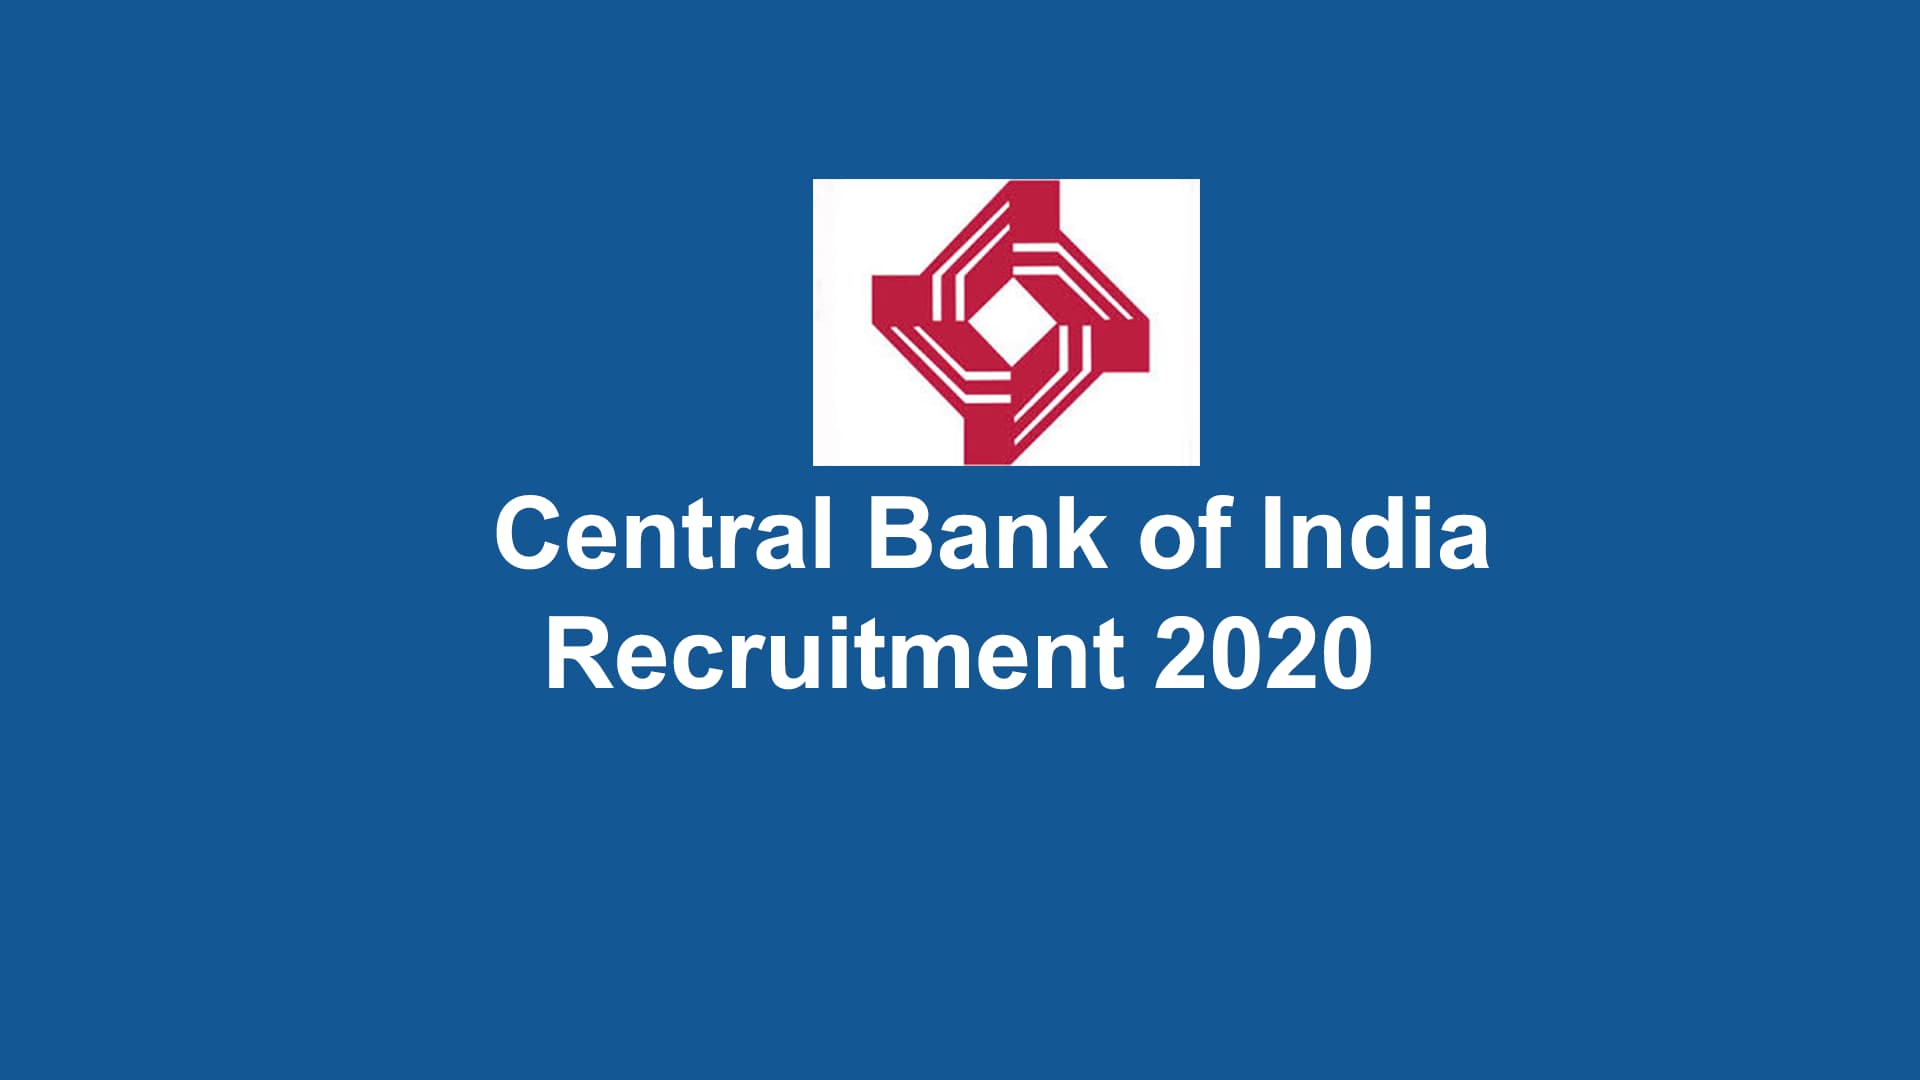 Central Bank of India Recruitment 2020